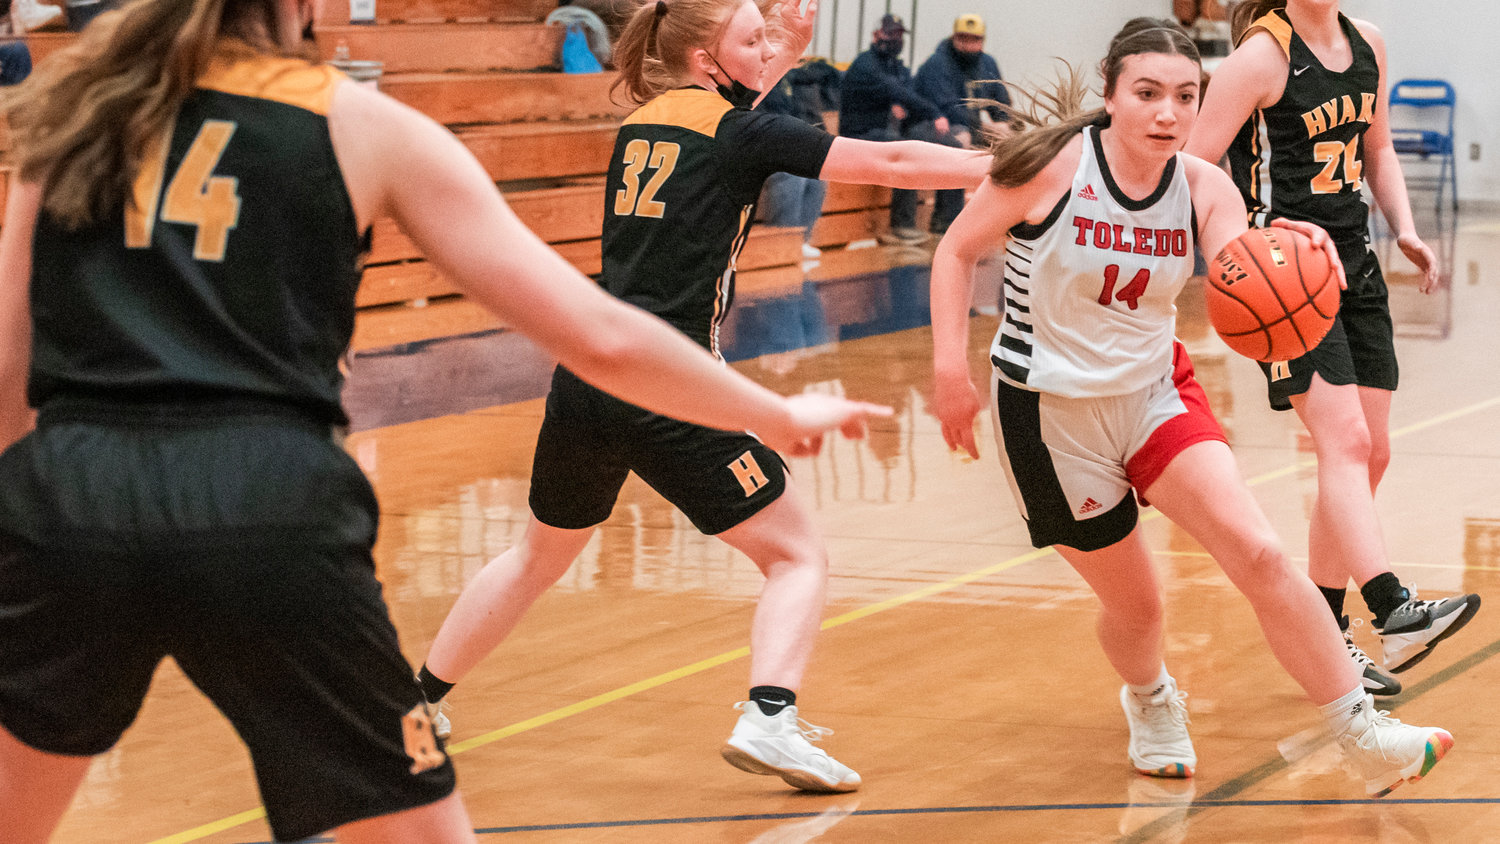 Toledo’s Hope Gould (14) dribbles around Hyak defenders during a game at Rochester High School Tuesday night.